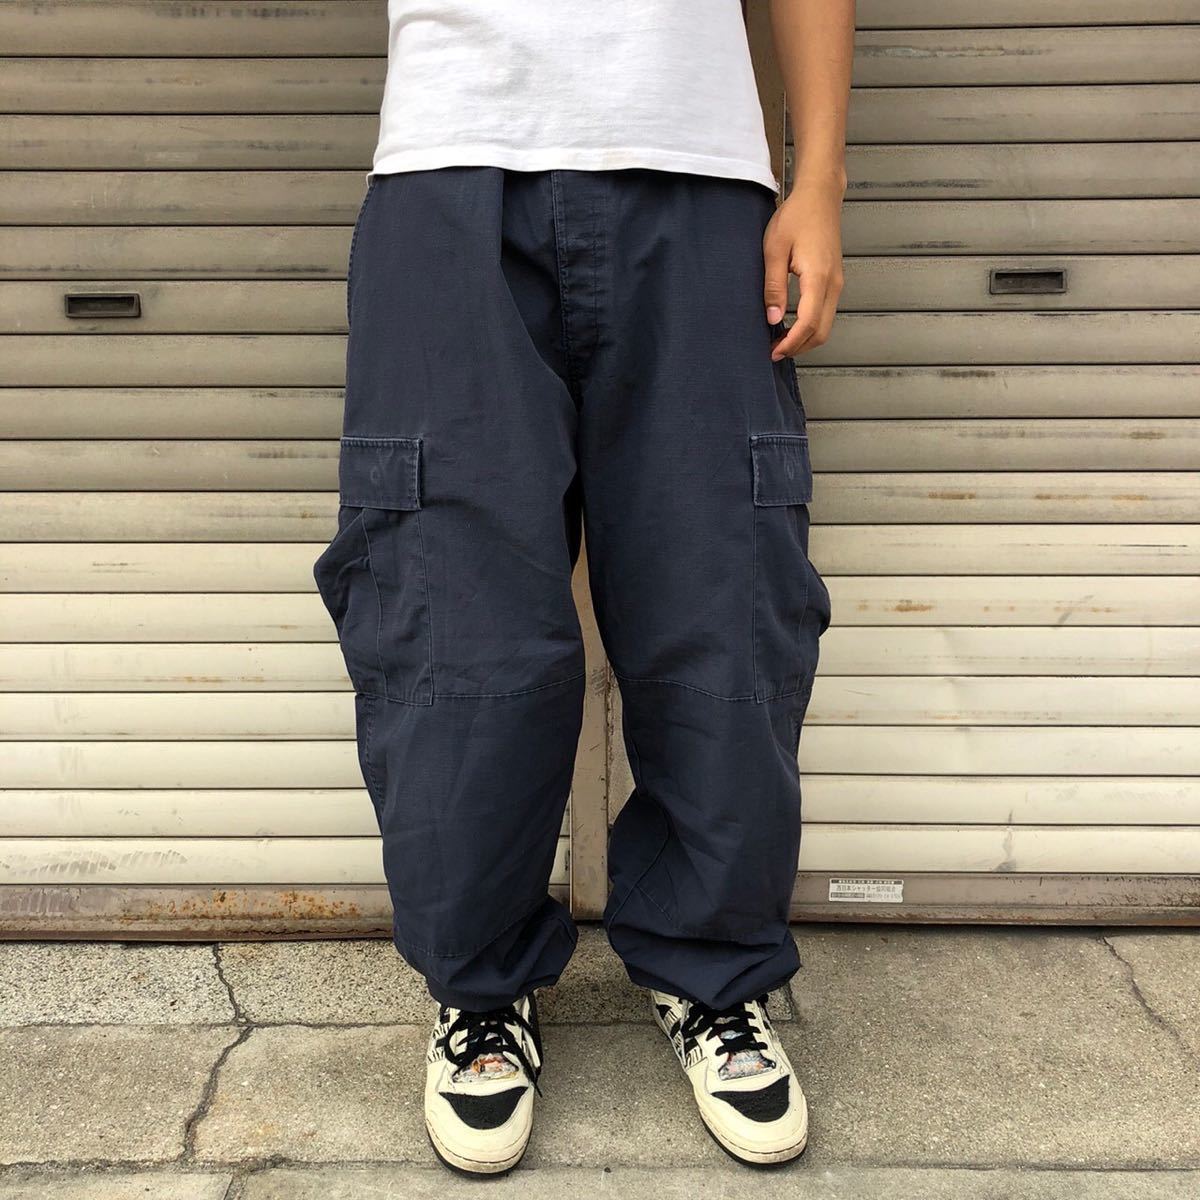 USA製 米軍 ビッグサイズ THE FORCE BATTLE BDU PANTS ミリタリー